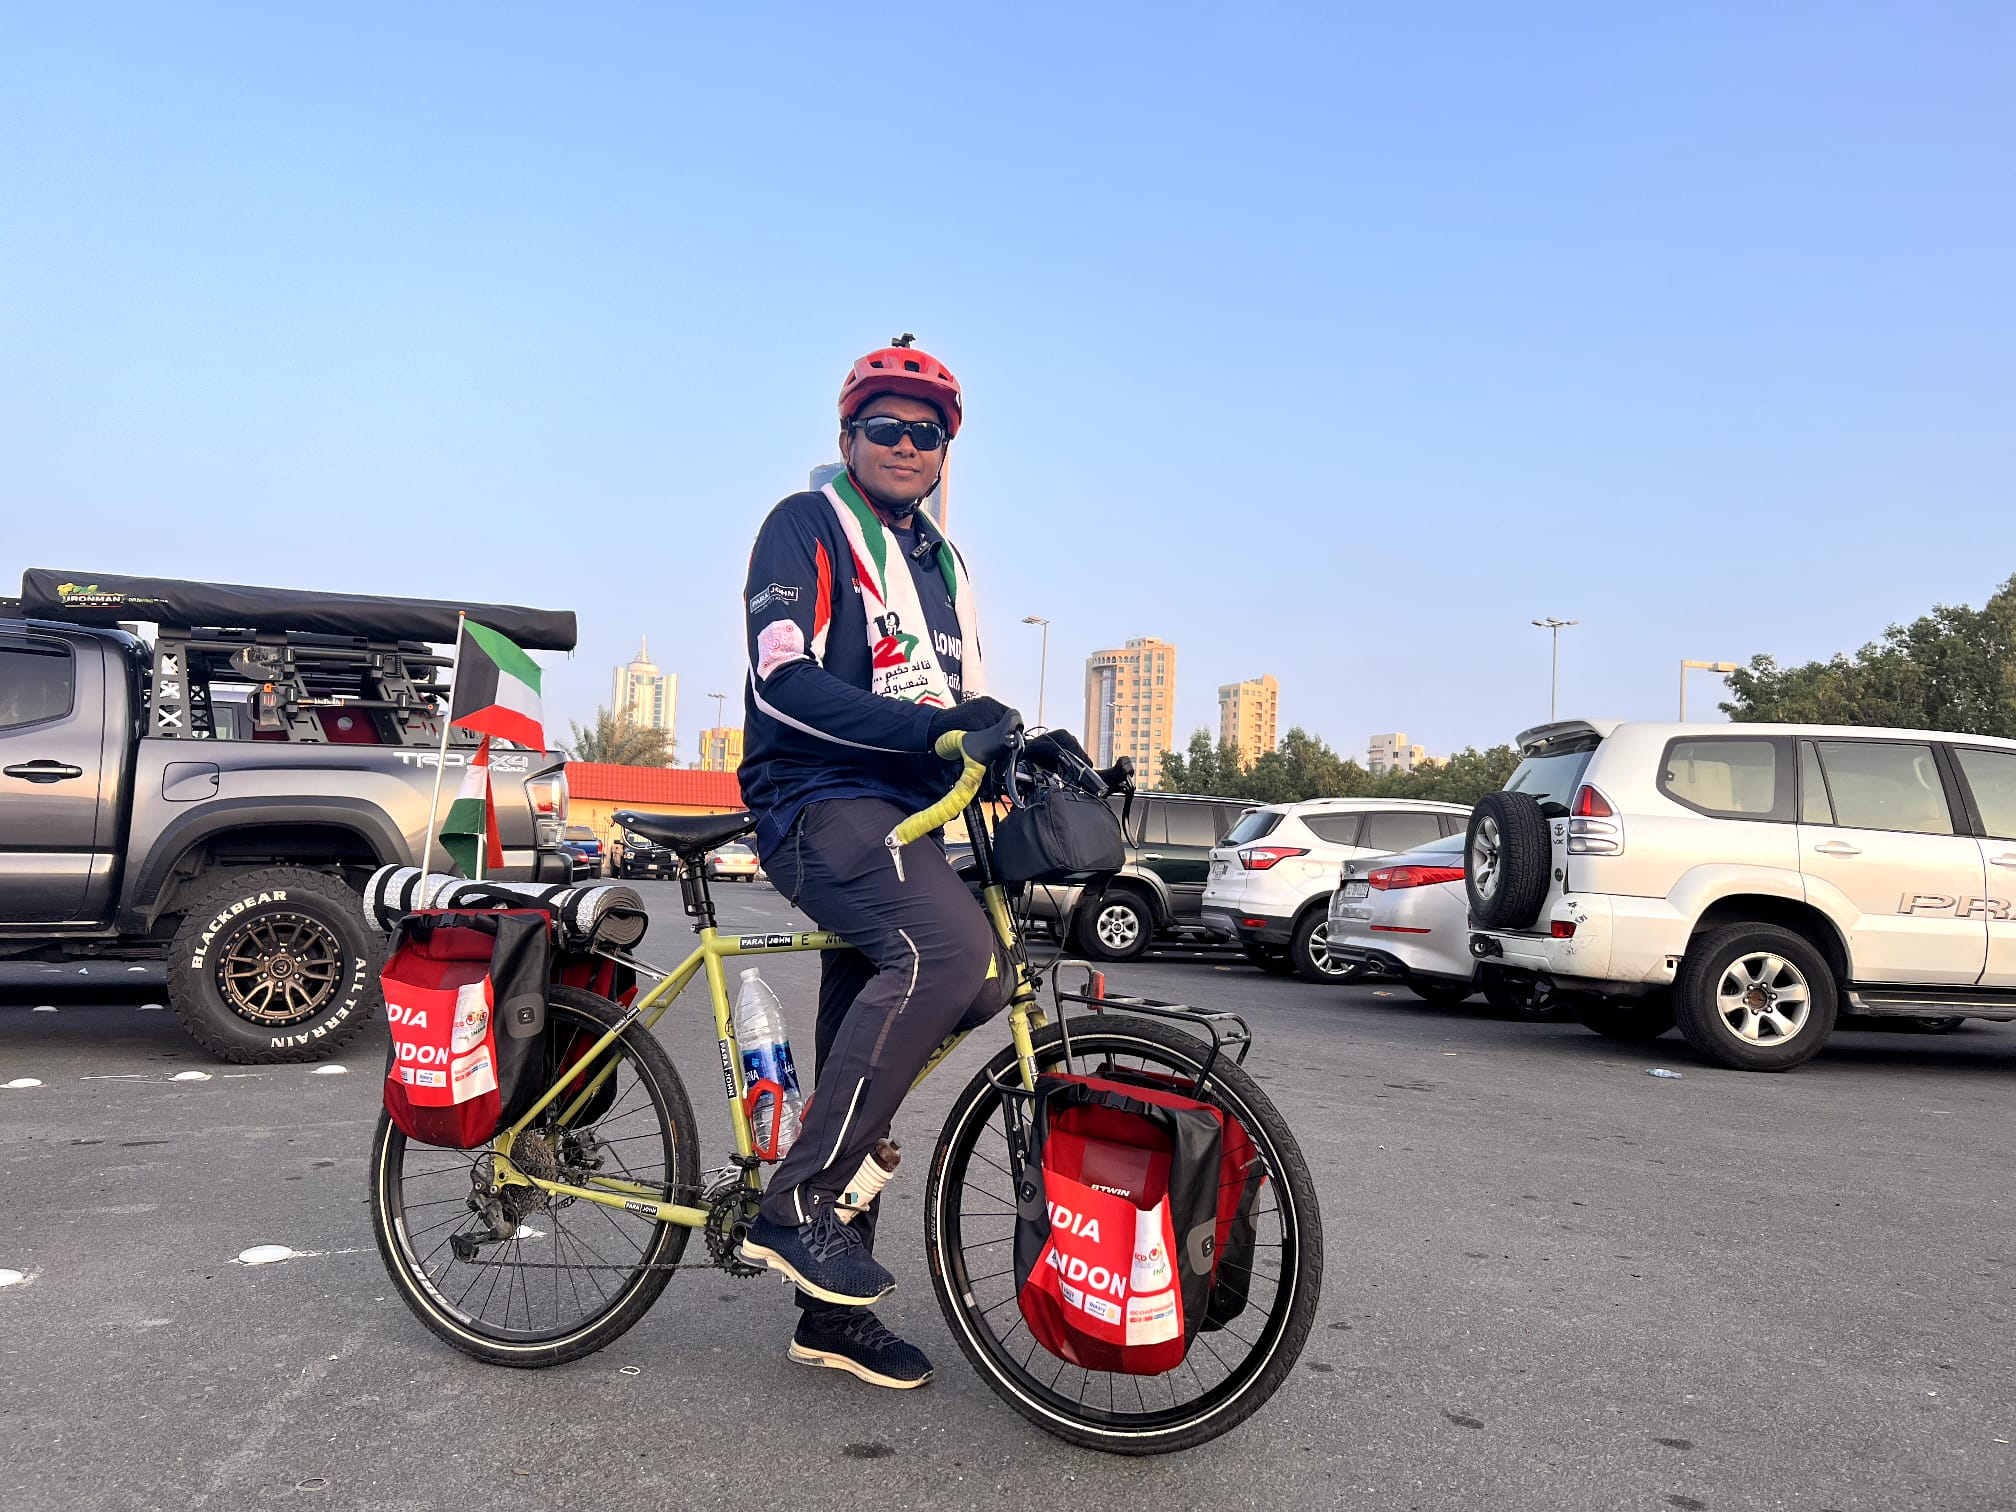 Fayis Asraf Ali, arrives in Kuwait on Saturday as part of a solo cycle expedition from India to London. n